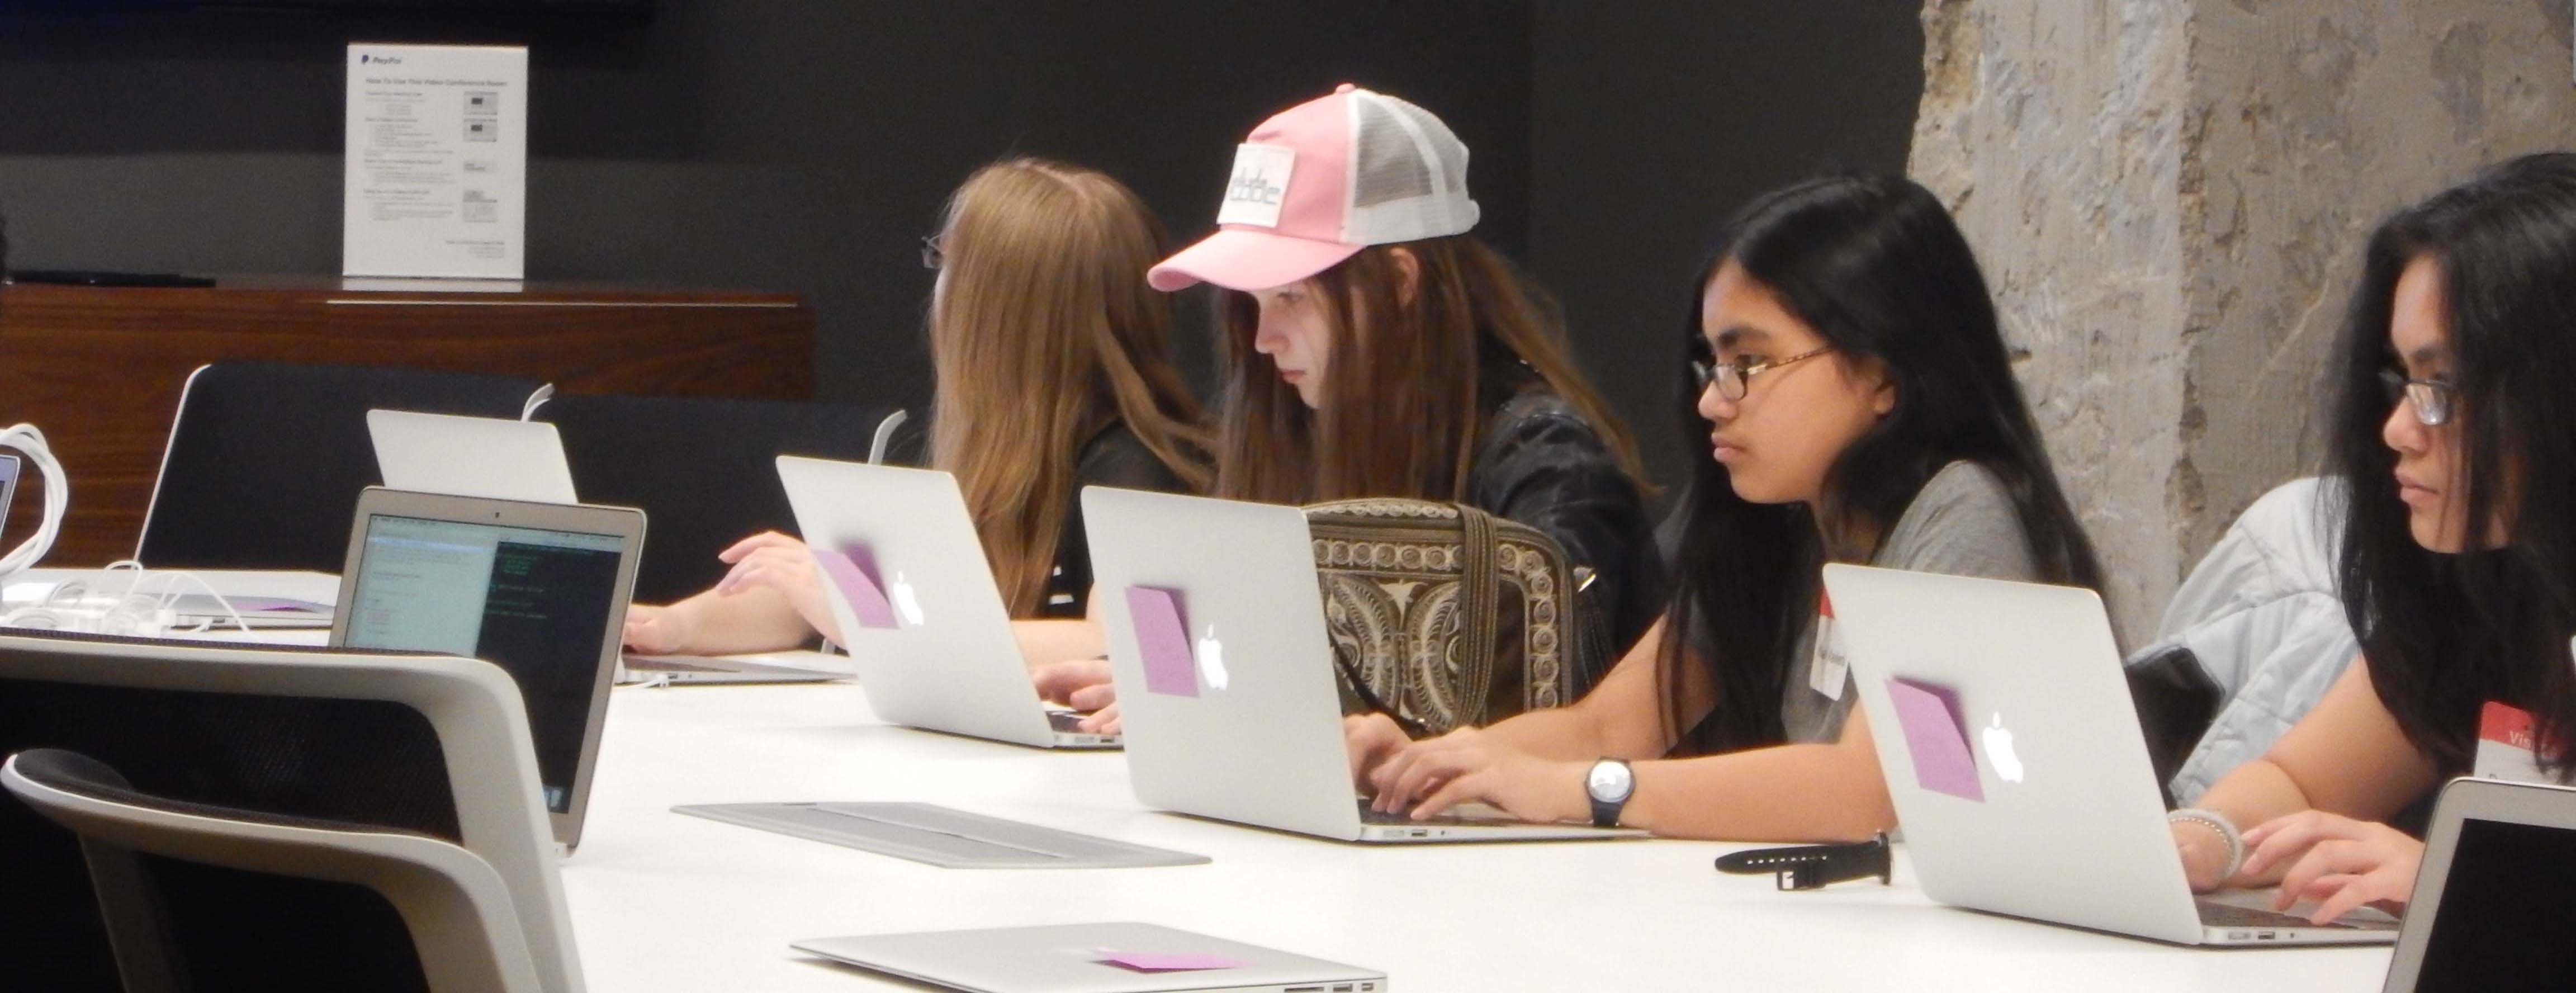 A group of University of Illinois at Chicago's Girls Who Code club members attends a workshop during a field trip at Braintree headquarters, at Chicago's Merchandise Mart. (Credits: Girls Who Code UIC Club)